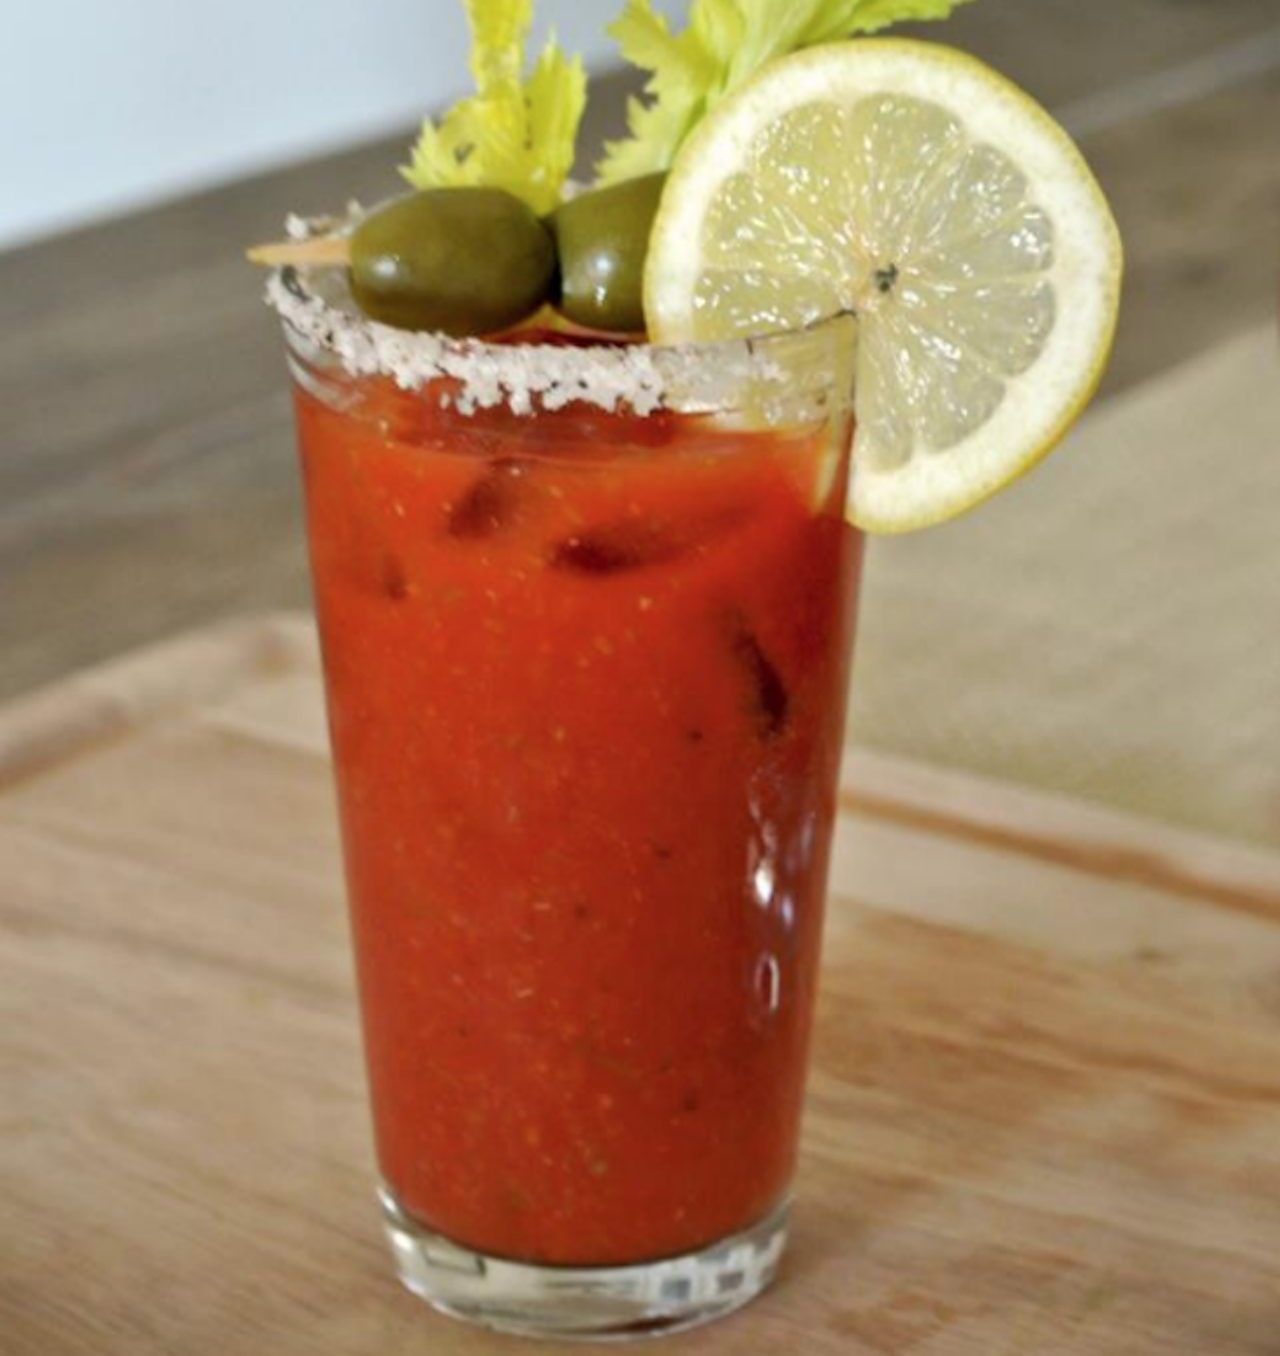 White Wolf Cafe
1829 N. Orange Ave. | 407-895-9911
What can we say other than the White Wolf Bloody Mary is ZESTY. Drenched with Tito's Vodka then spiced up with chipotle mix, this bad boy might require an order of milk to go with it.
Photo via White Wolf Cafe/Facebook